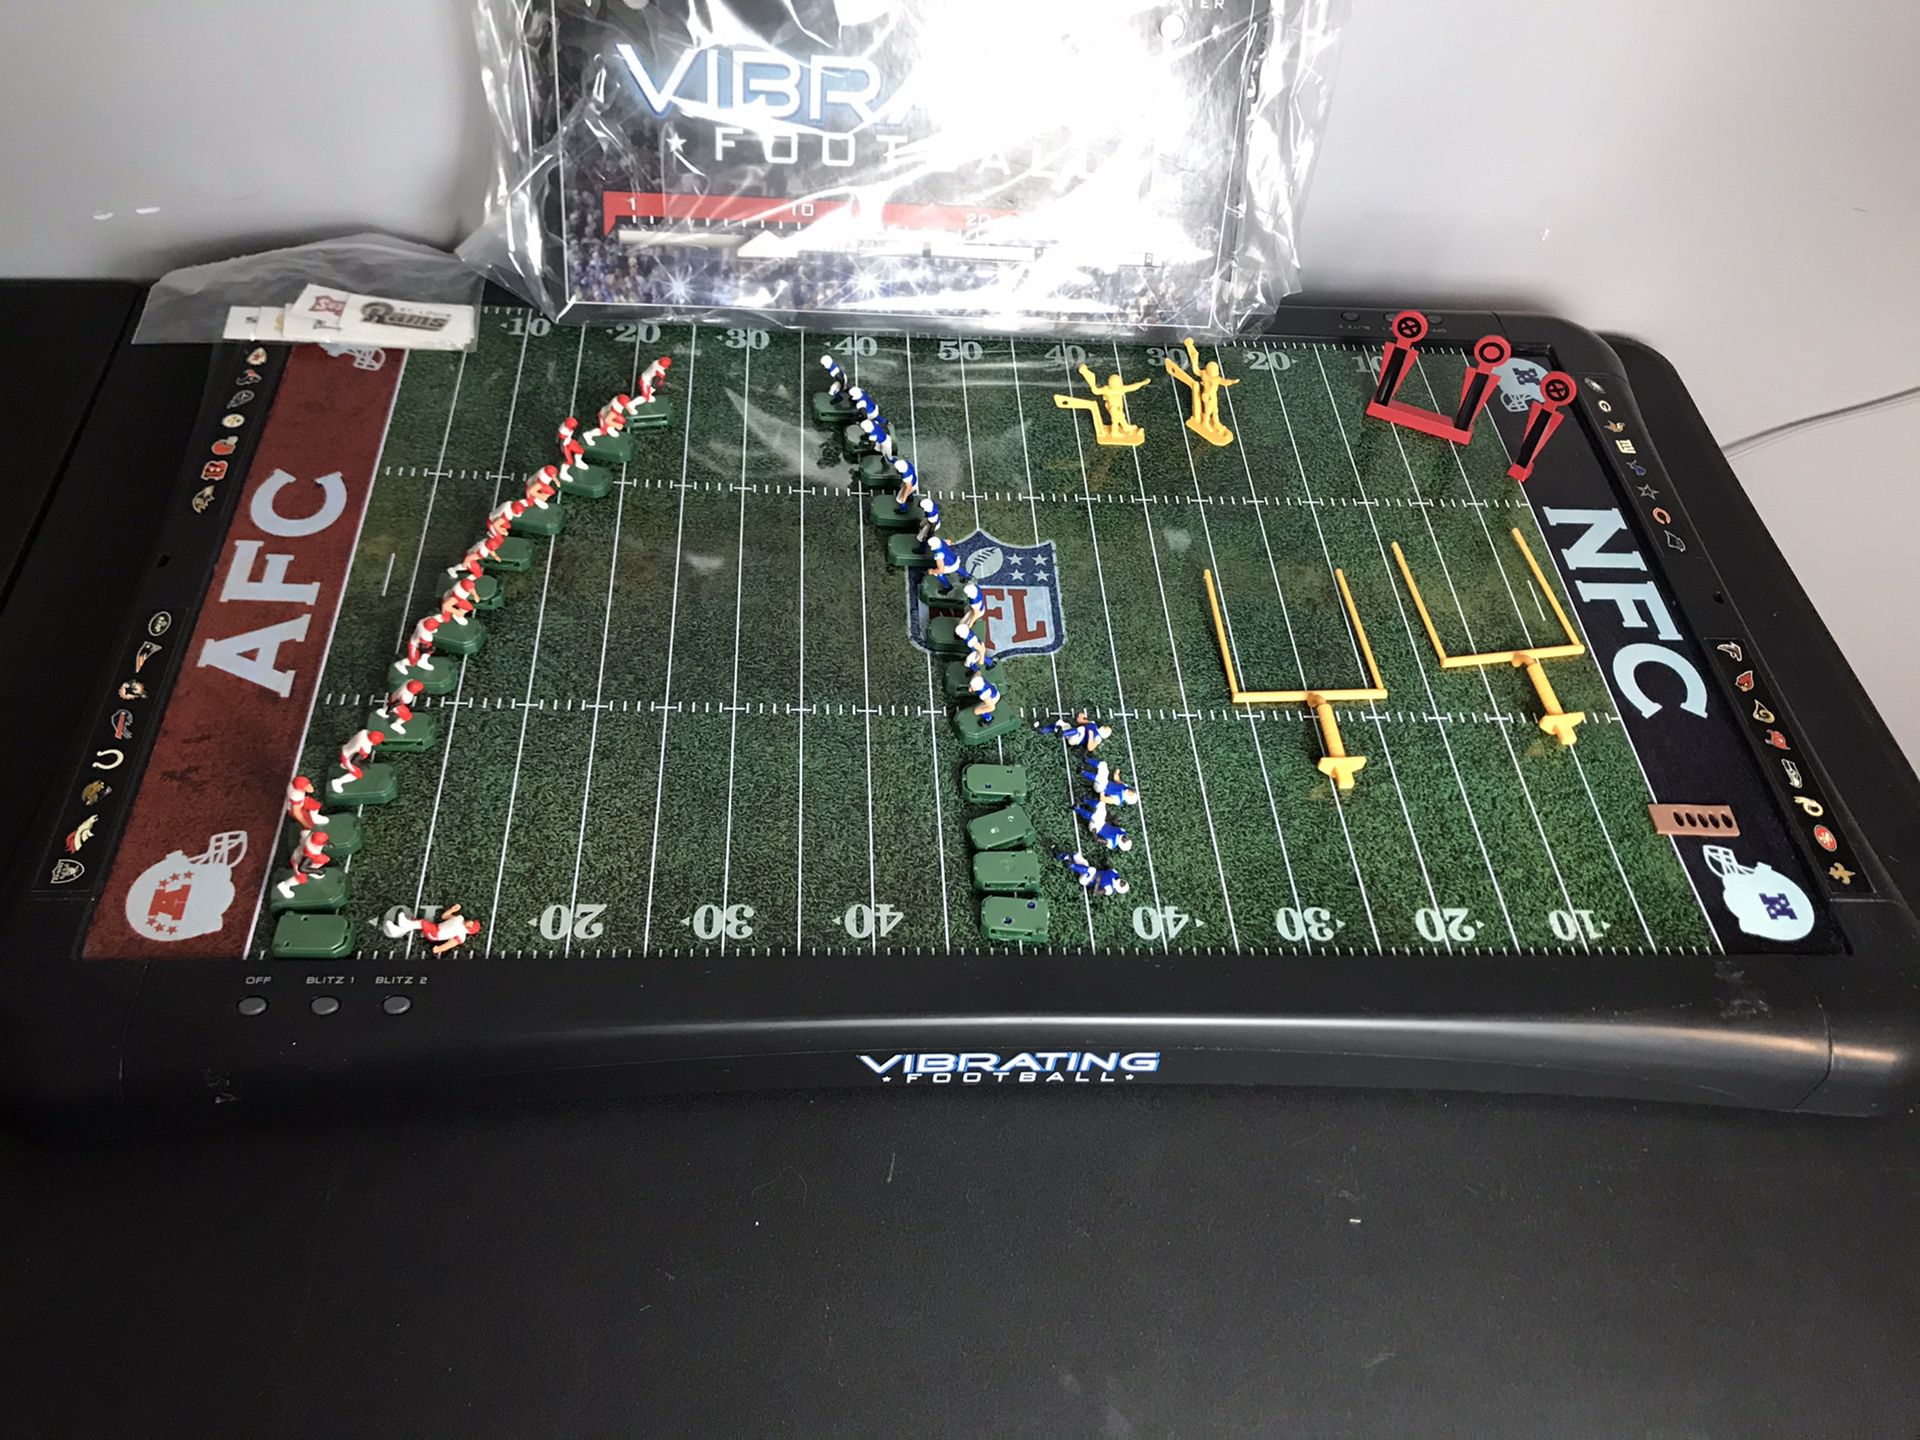 RARE EXCALIBUR NFL TABLETOP VIBRATING ELECTRONIC FOOTBALL GAME AFC NFC! YS